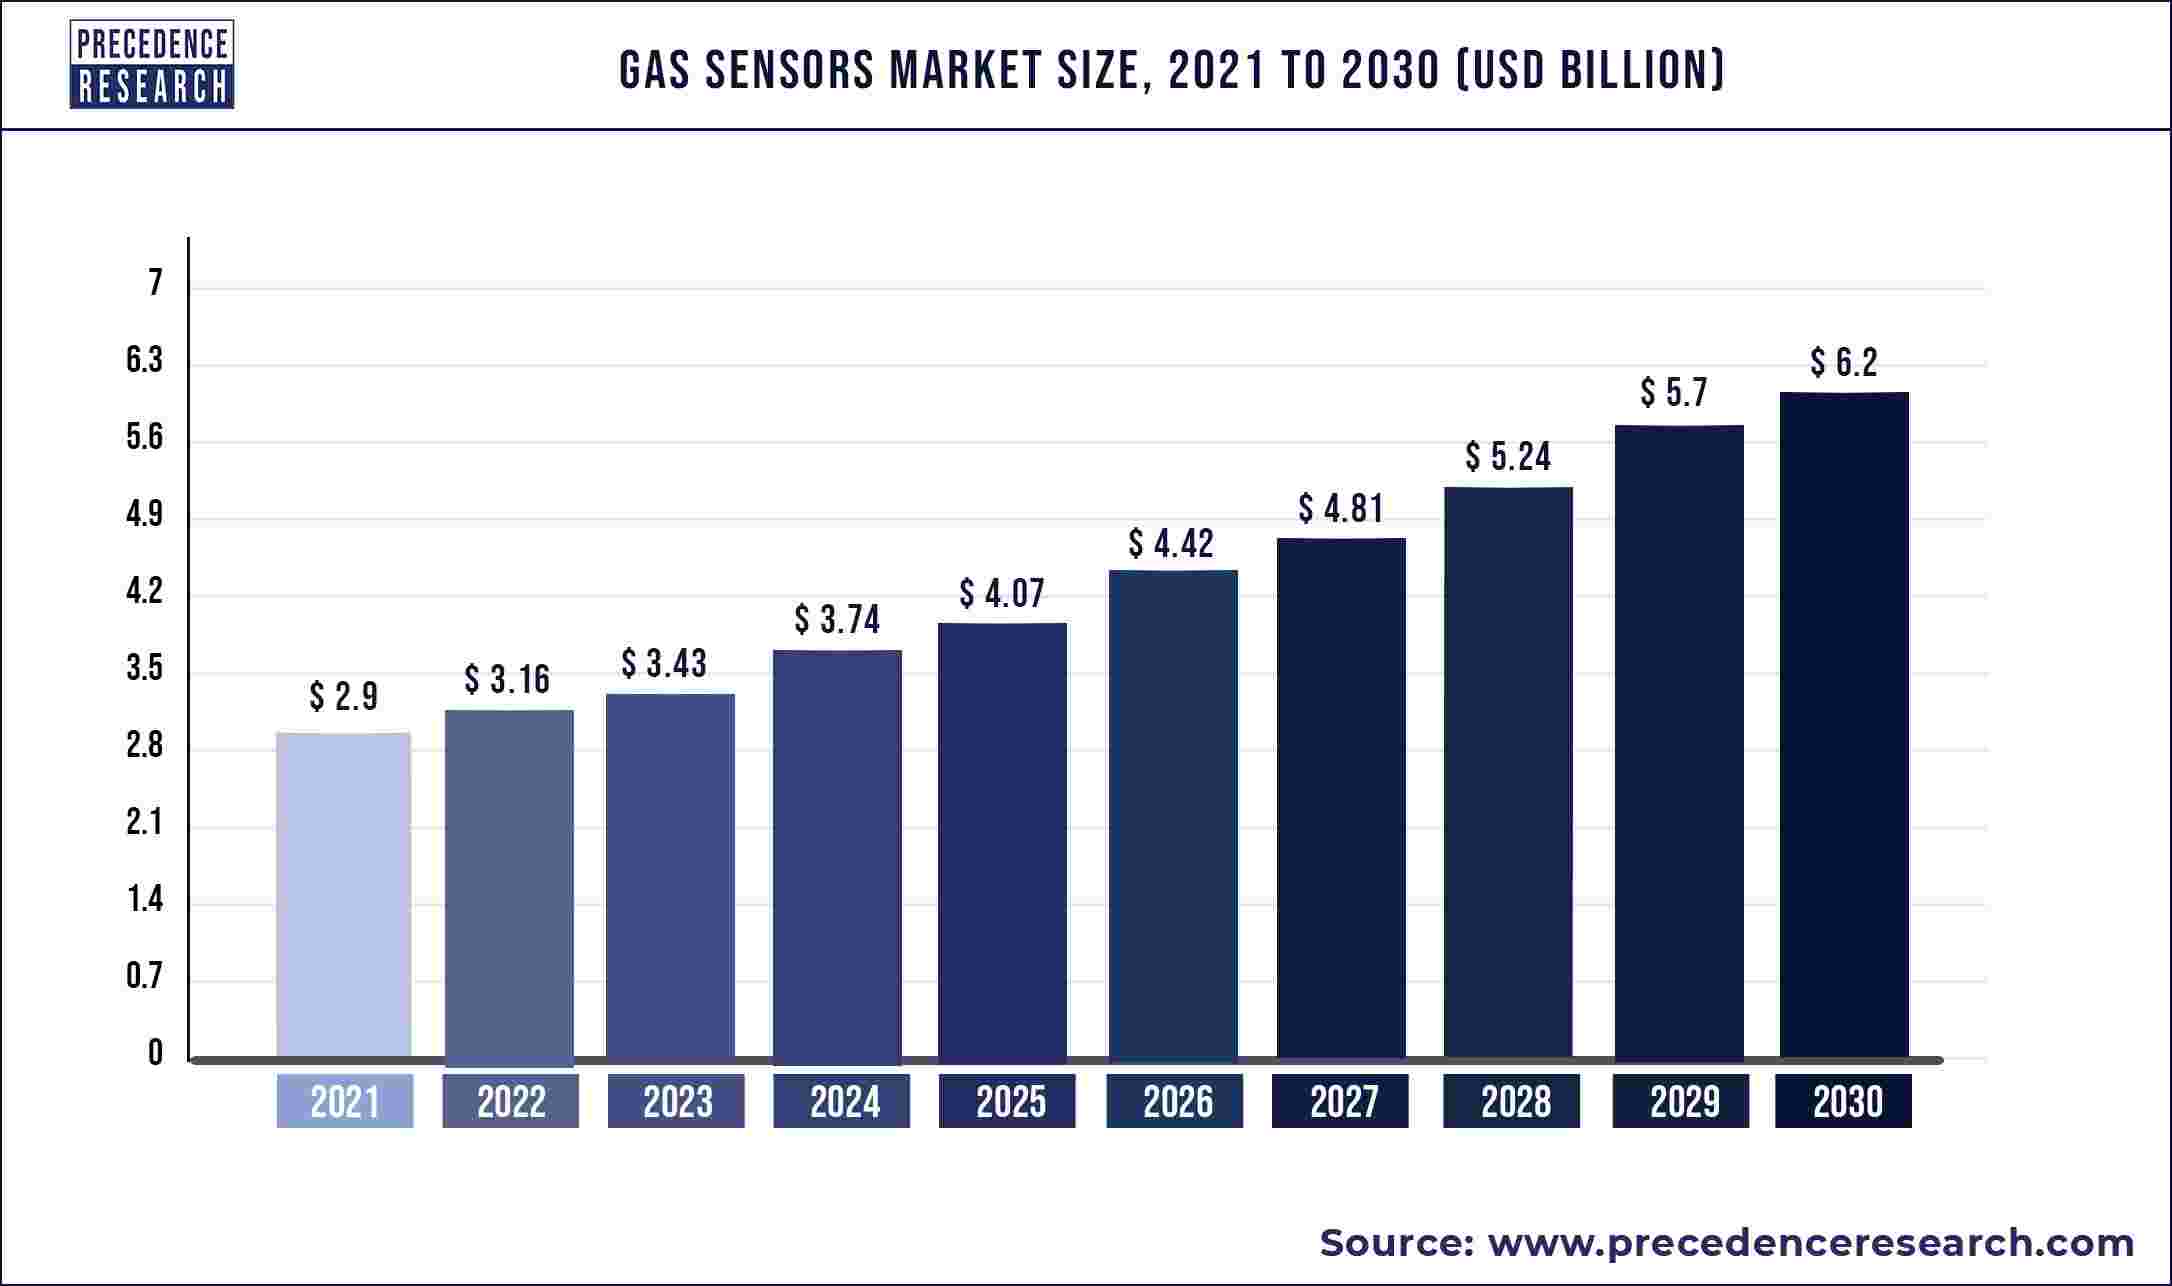 Gas Sensors Market Size is Forecasted to Reach US$ 6.2 Billion by 2030